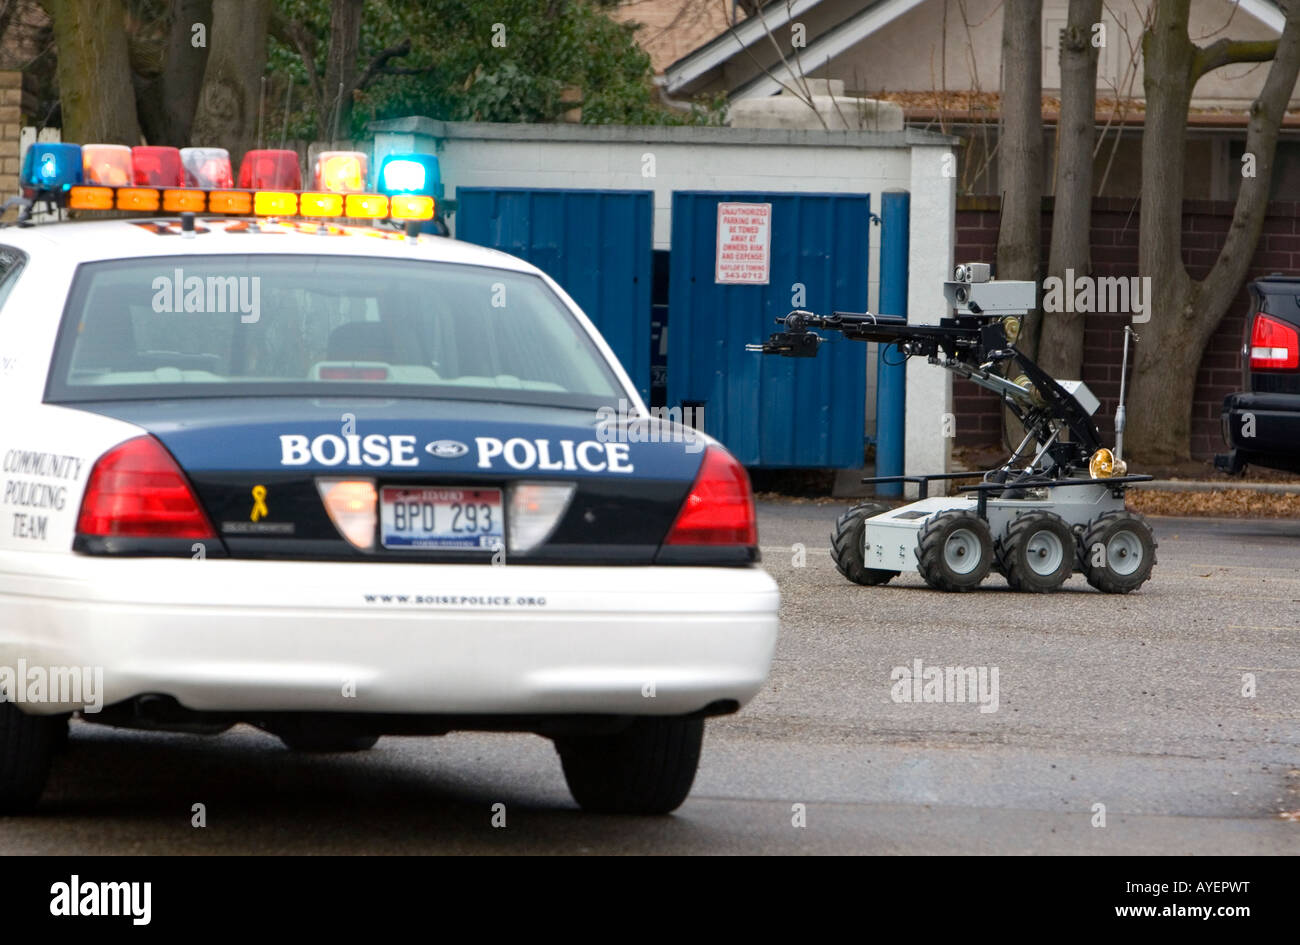 Remote bomb disposal robot being used by the Boise Police Department Bomb Squad in Boise Idaho Stock Photo